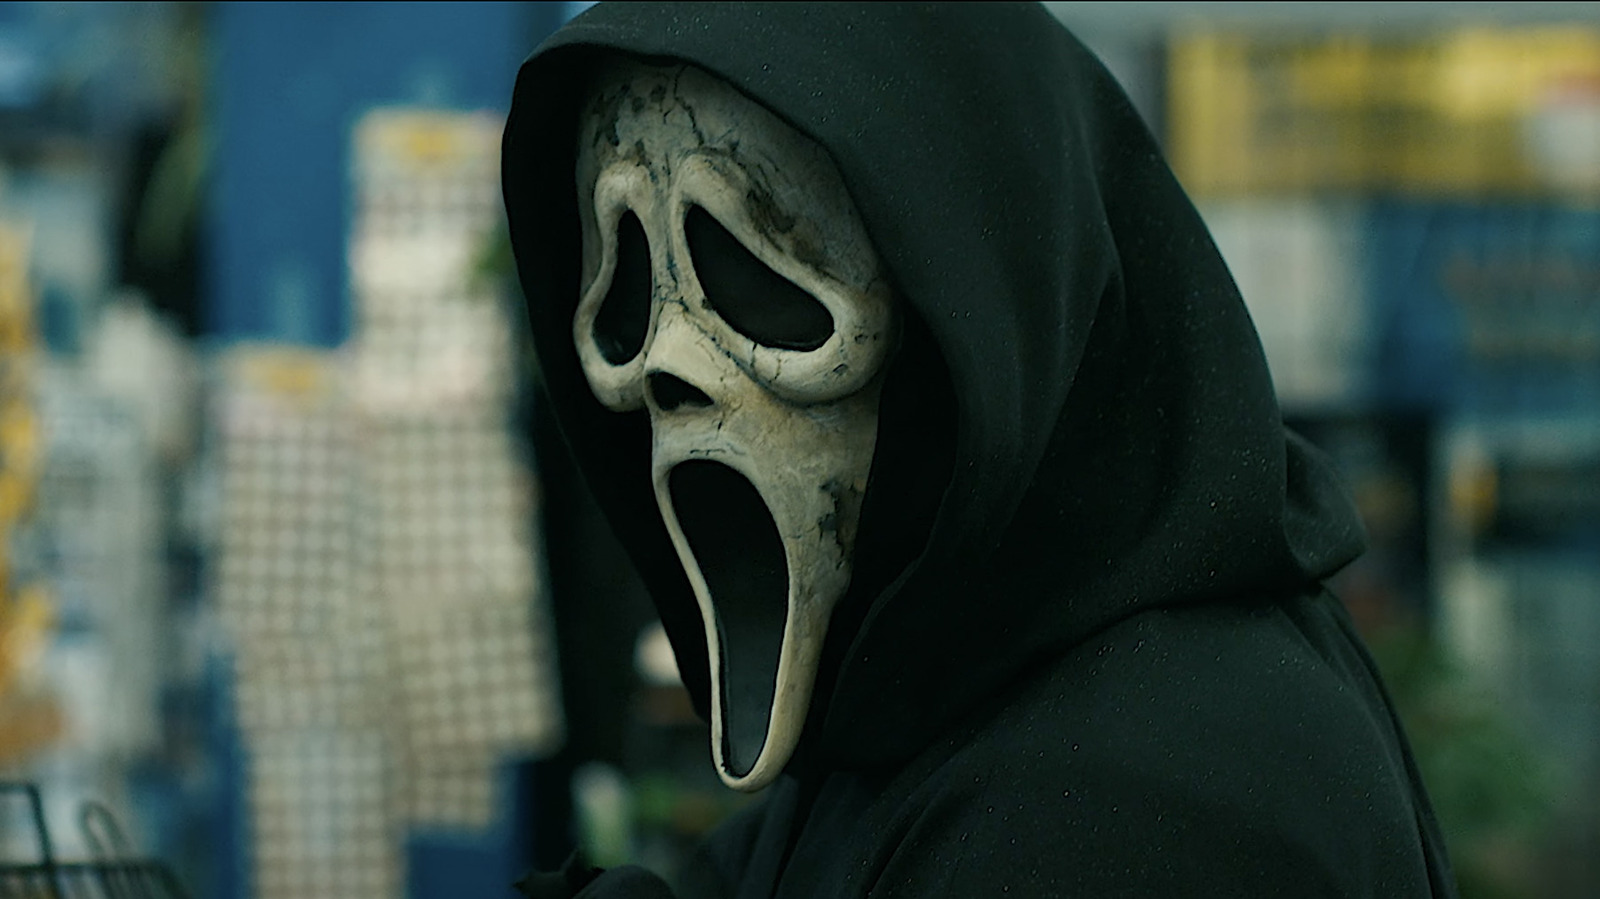 whoever watches the new #Scream6 teaser gets a Ghostface cookie